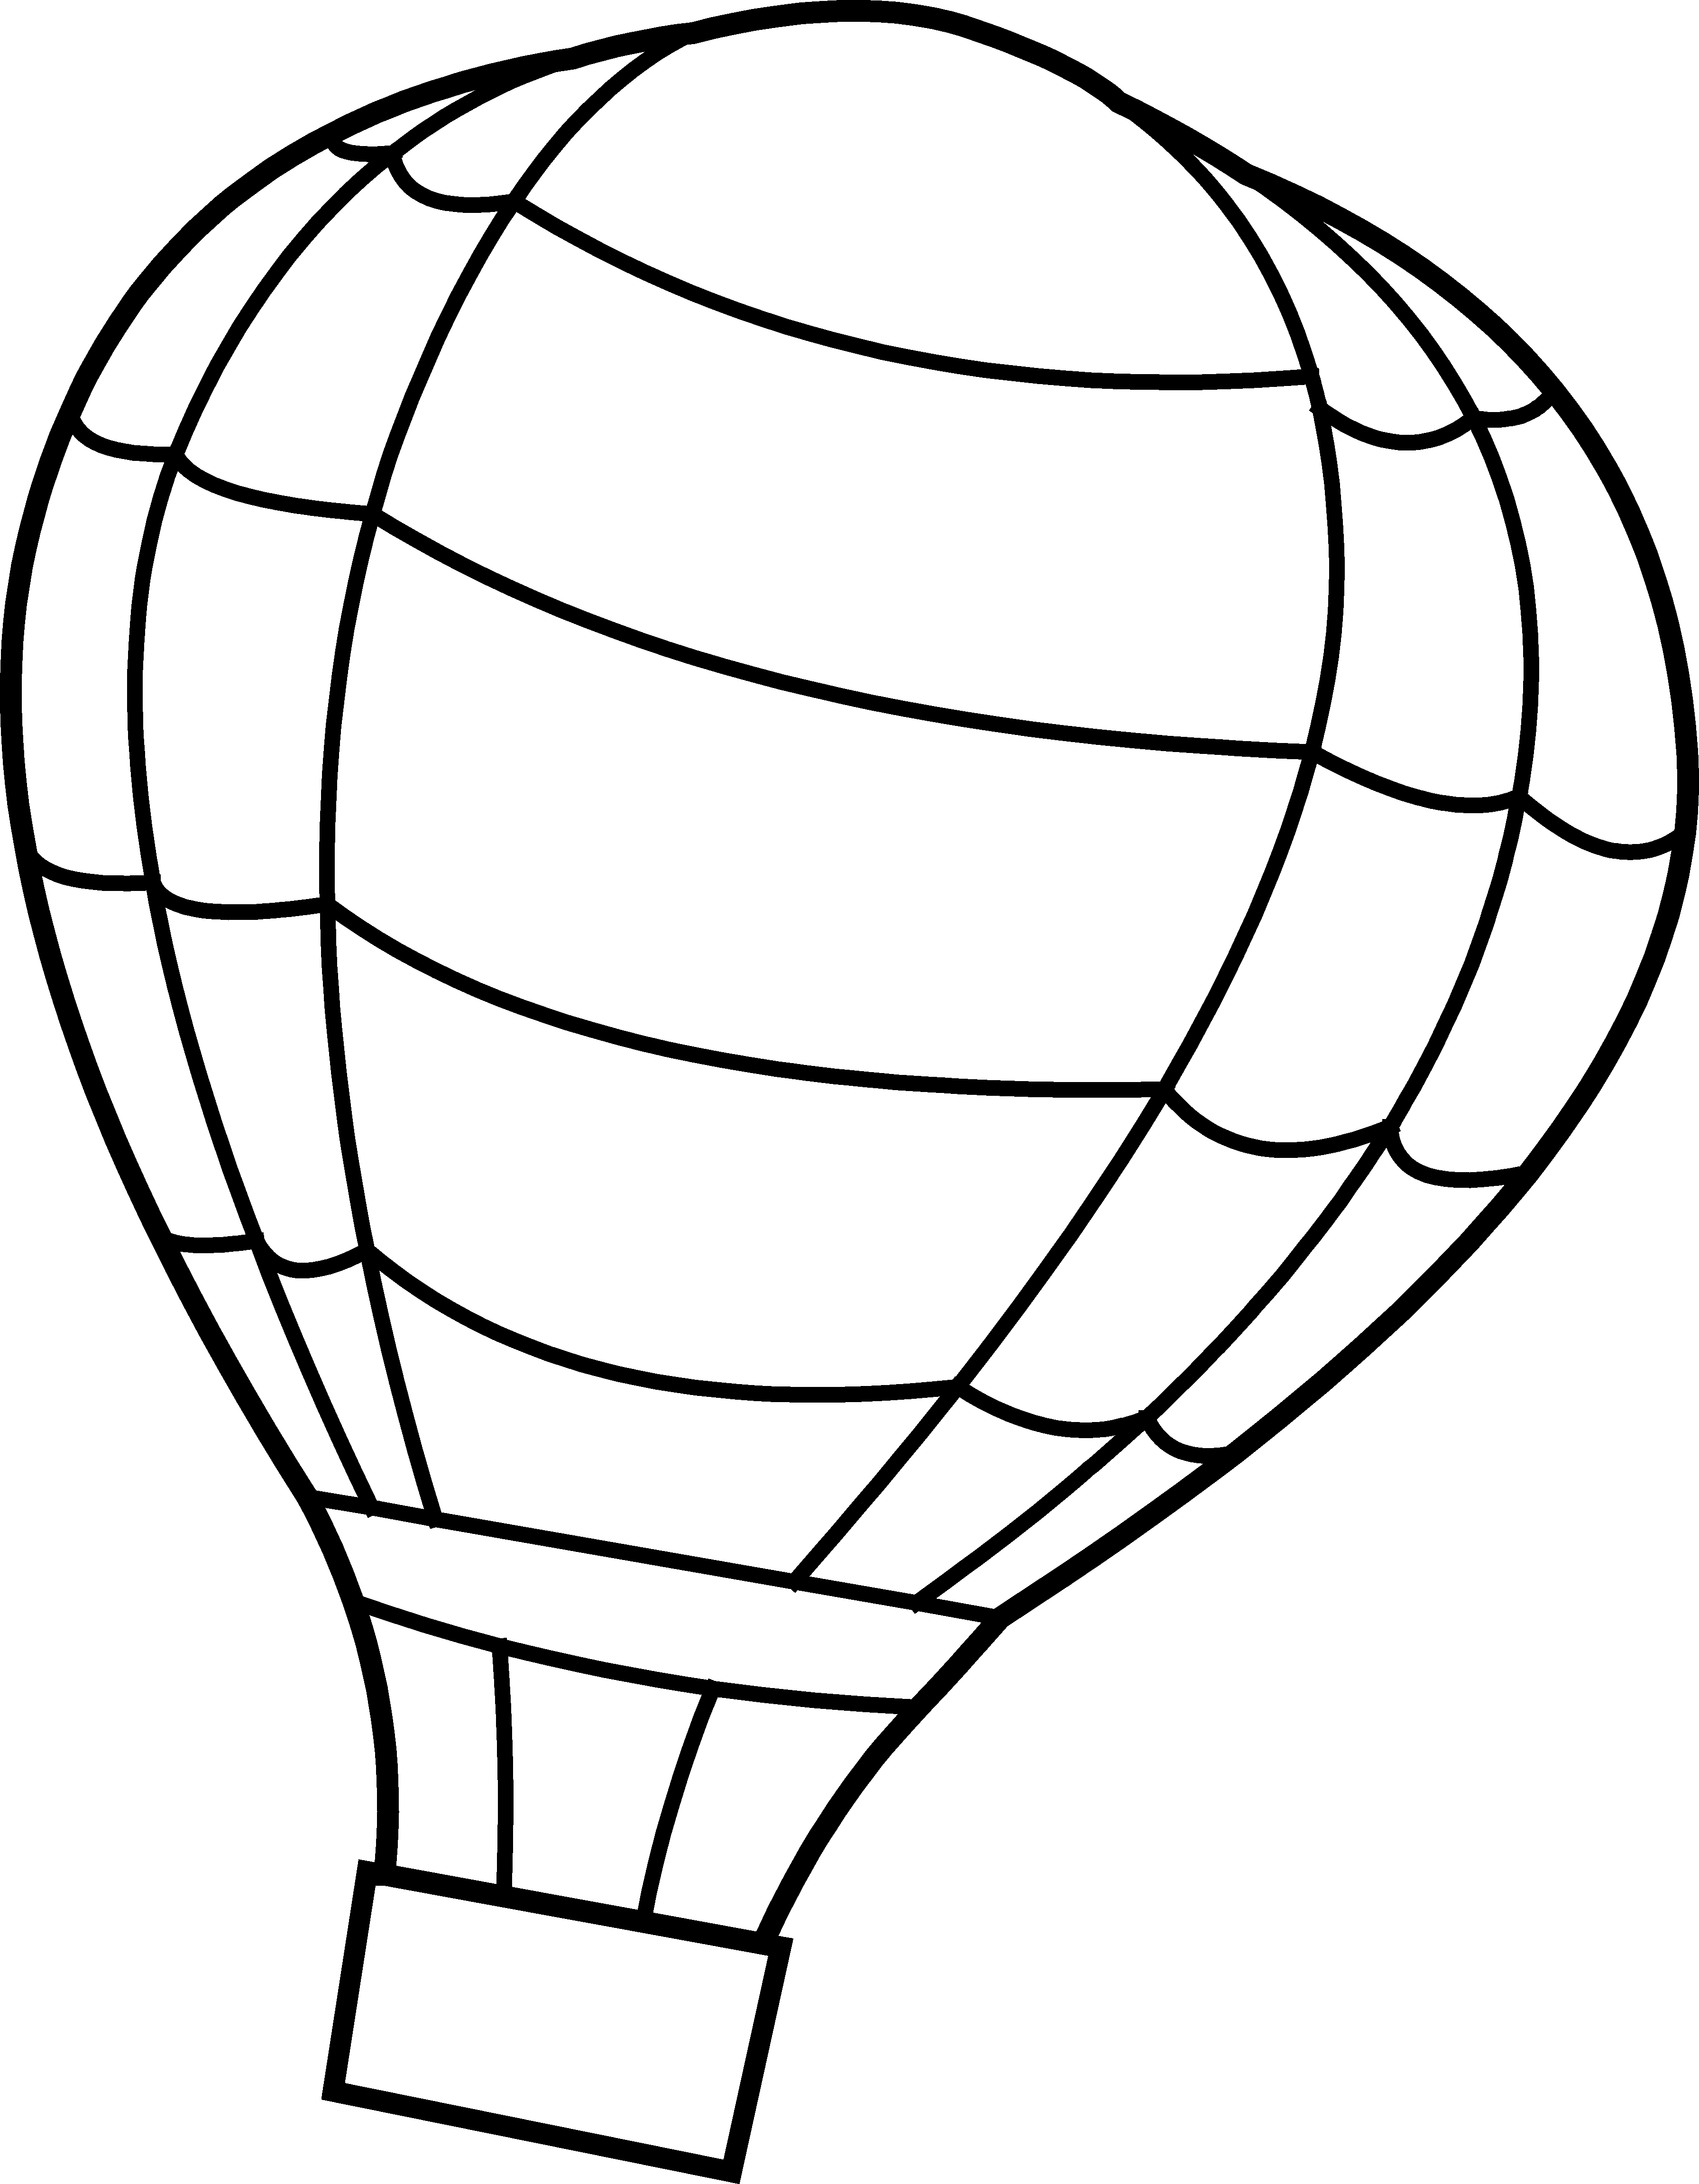 Hot Air Balloon Basket Template - Free Clipart Images